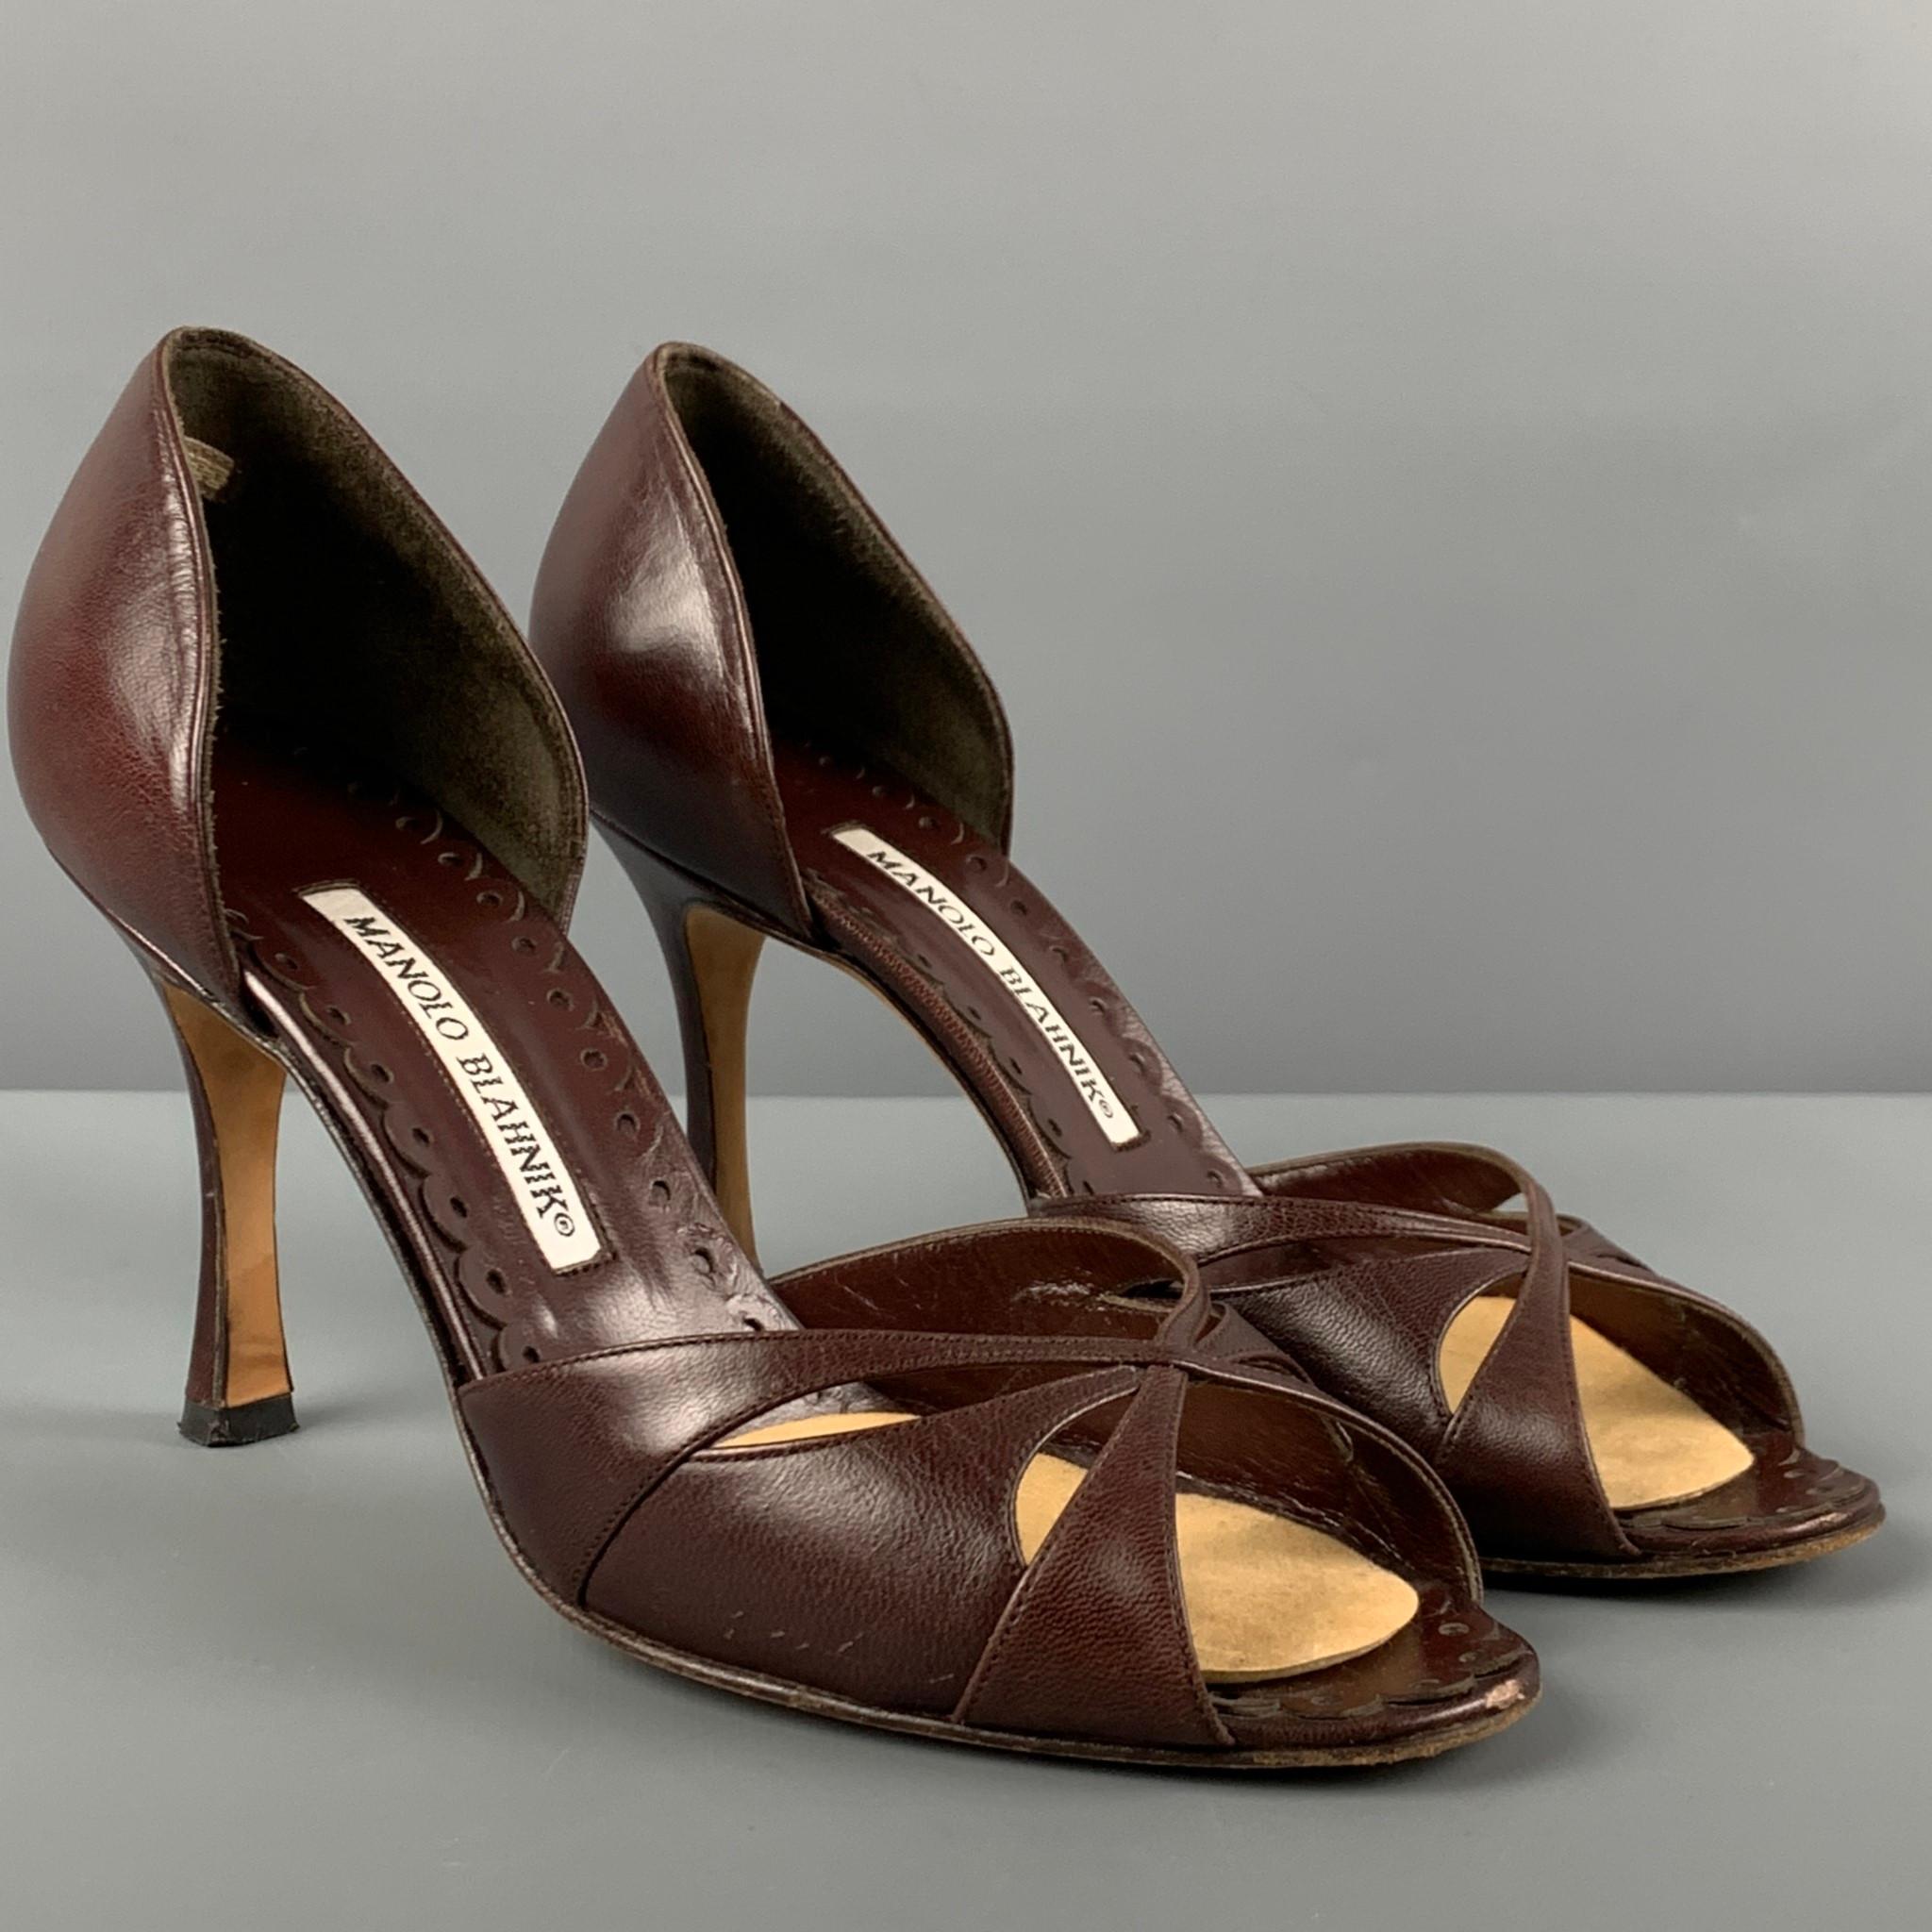 MANOLO BLAHNIK pumps comes in a brown leather featuring a d'orsay style, open toe, and a stiletto heel. Made in Italy. 

Very Good Pre-Owned Condition.
Marked: 37

Measurements:

Heel: 3.5 in. 